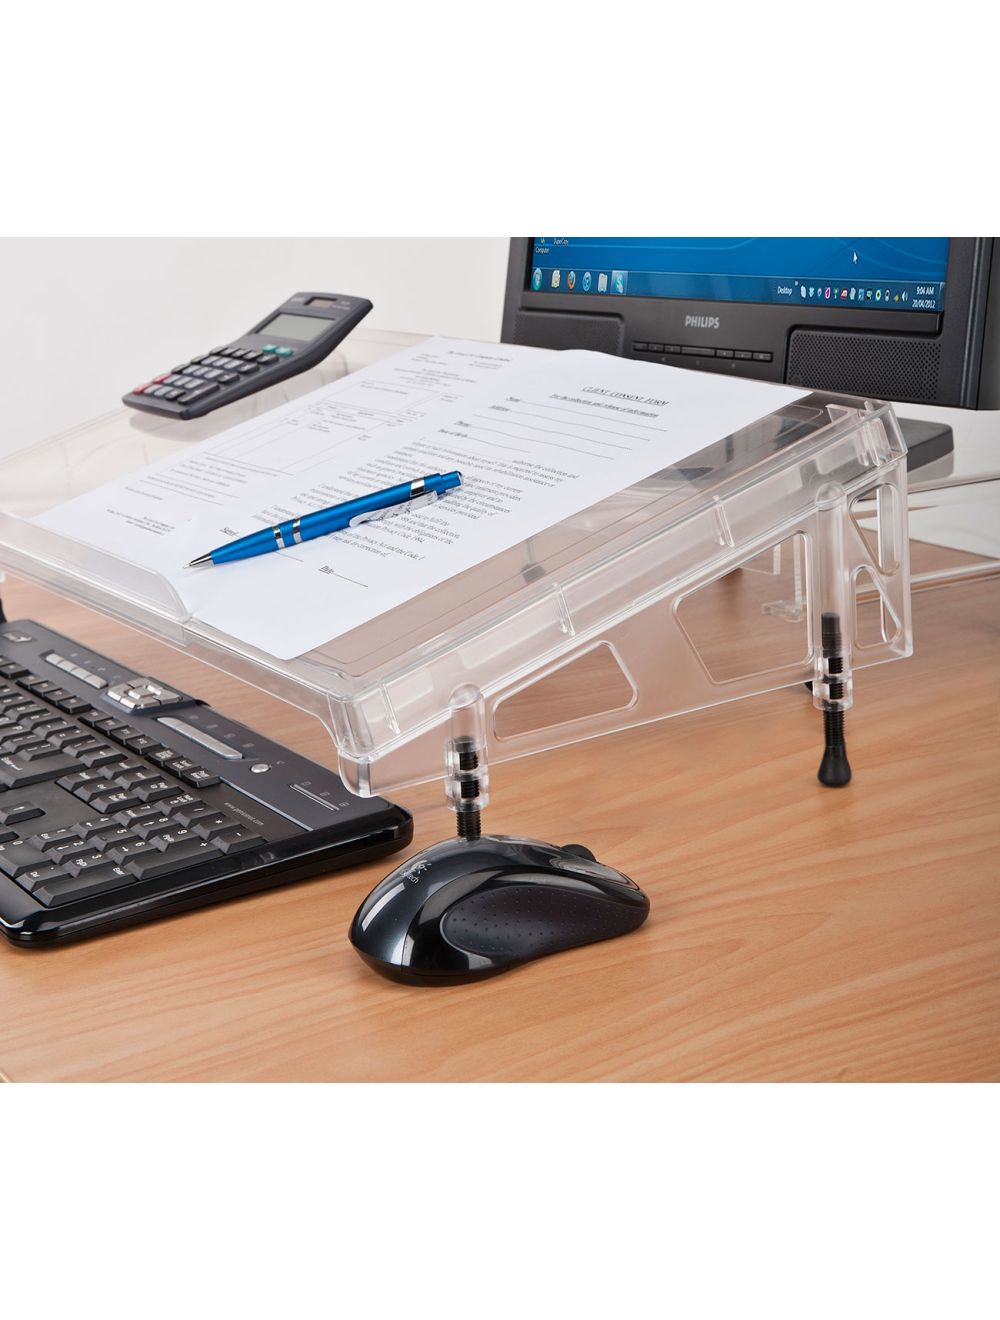 Regular Microdesk side view. Product is adjustable up to 45mm at the rear and 30mm at the front